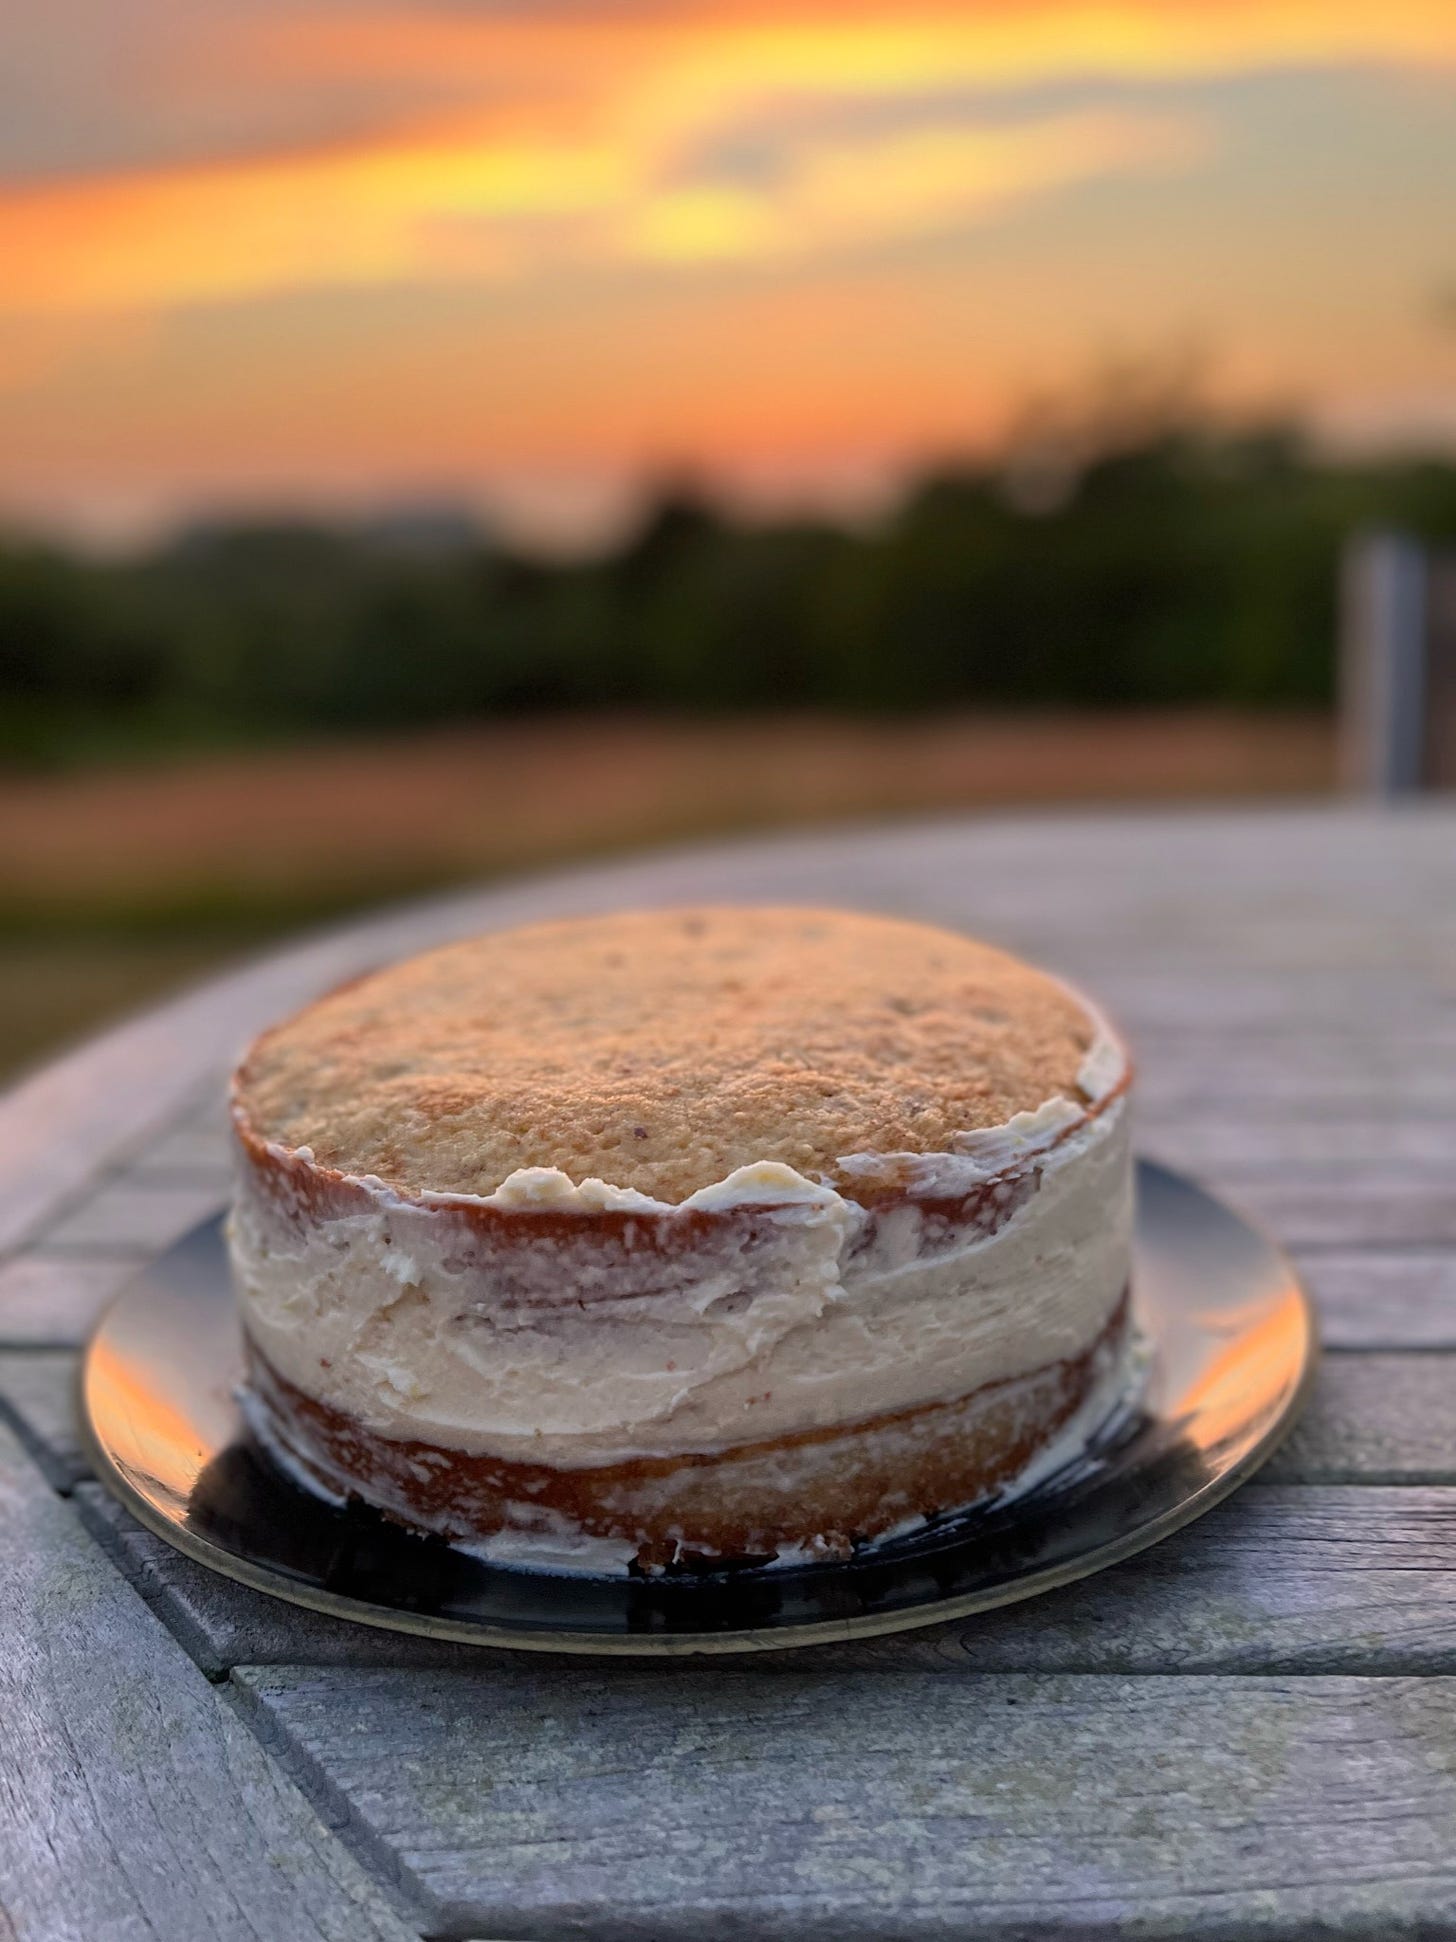 A two layer, semi-frosted almond cake sits on an outdoor table at sunset.